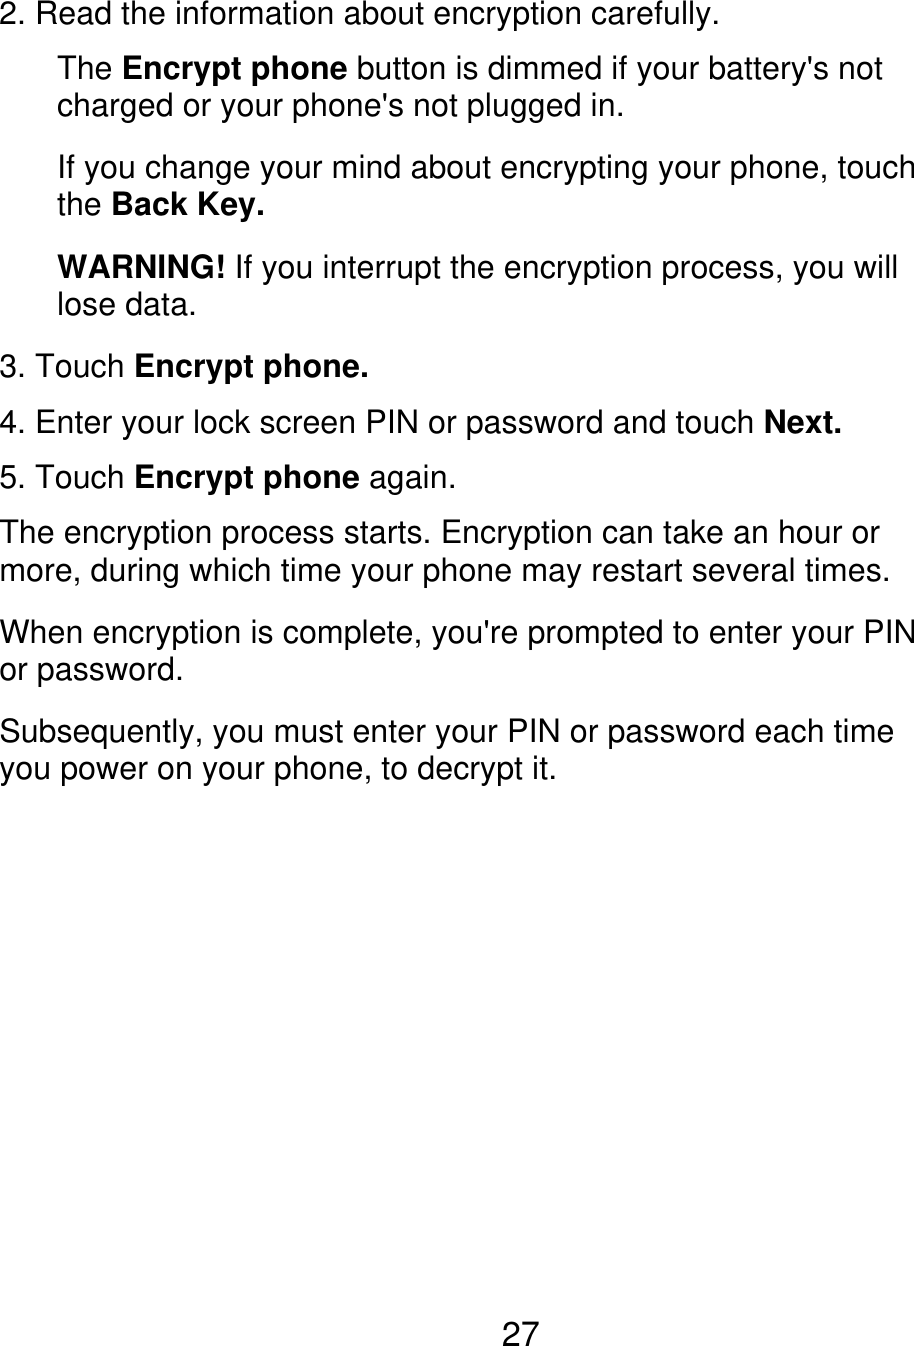 2. Read the information about encryption carefully. The Encrypt phone button is dimmed if your battery&apos;s not charged or your phone&apos;s not plugged in. If you change your mind about encrypting your phone, touch the Back Key. WARNING! If you interrupt the encryption process, you will lose data. 3. Touch Encrypt phone. 4. Enter your lock screen PIN or password and touch Next. 5. Touch Encrypt phone again. The encryption process starts. Encryption can take an hour or more, during which time your phone may restart several times. When encryption is complete, you&apos;re prompted to enter your PIN or password. Subsequently, you must enter your PIN or password each time you power on your phone, to decrypt it. 27 